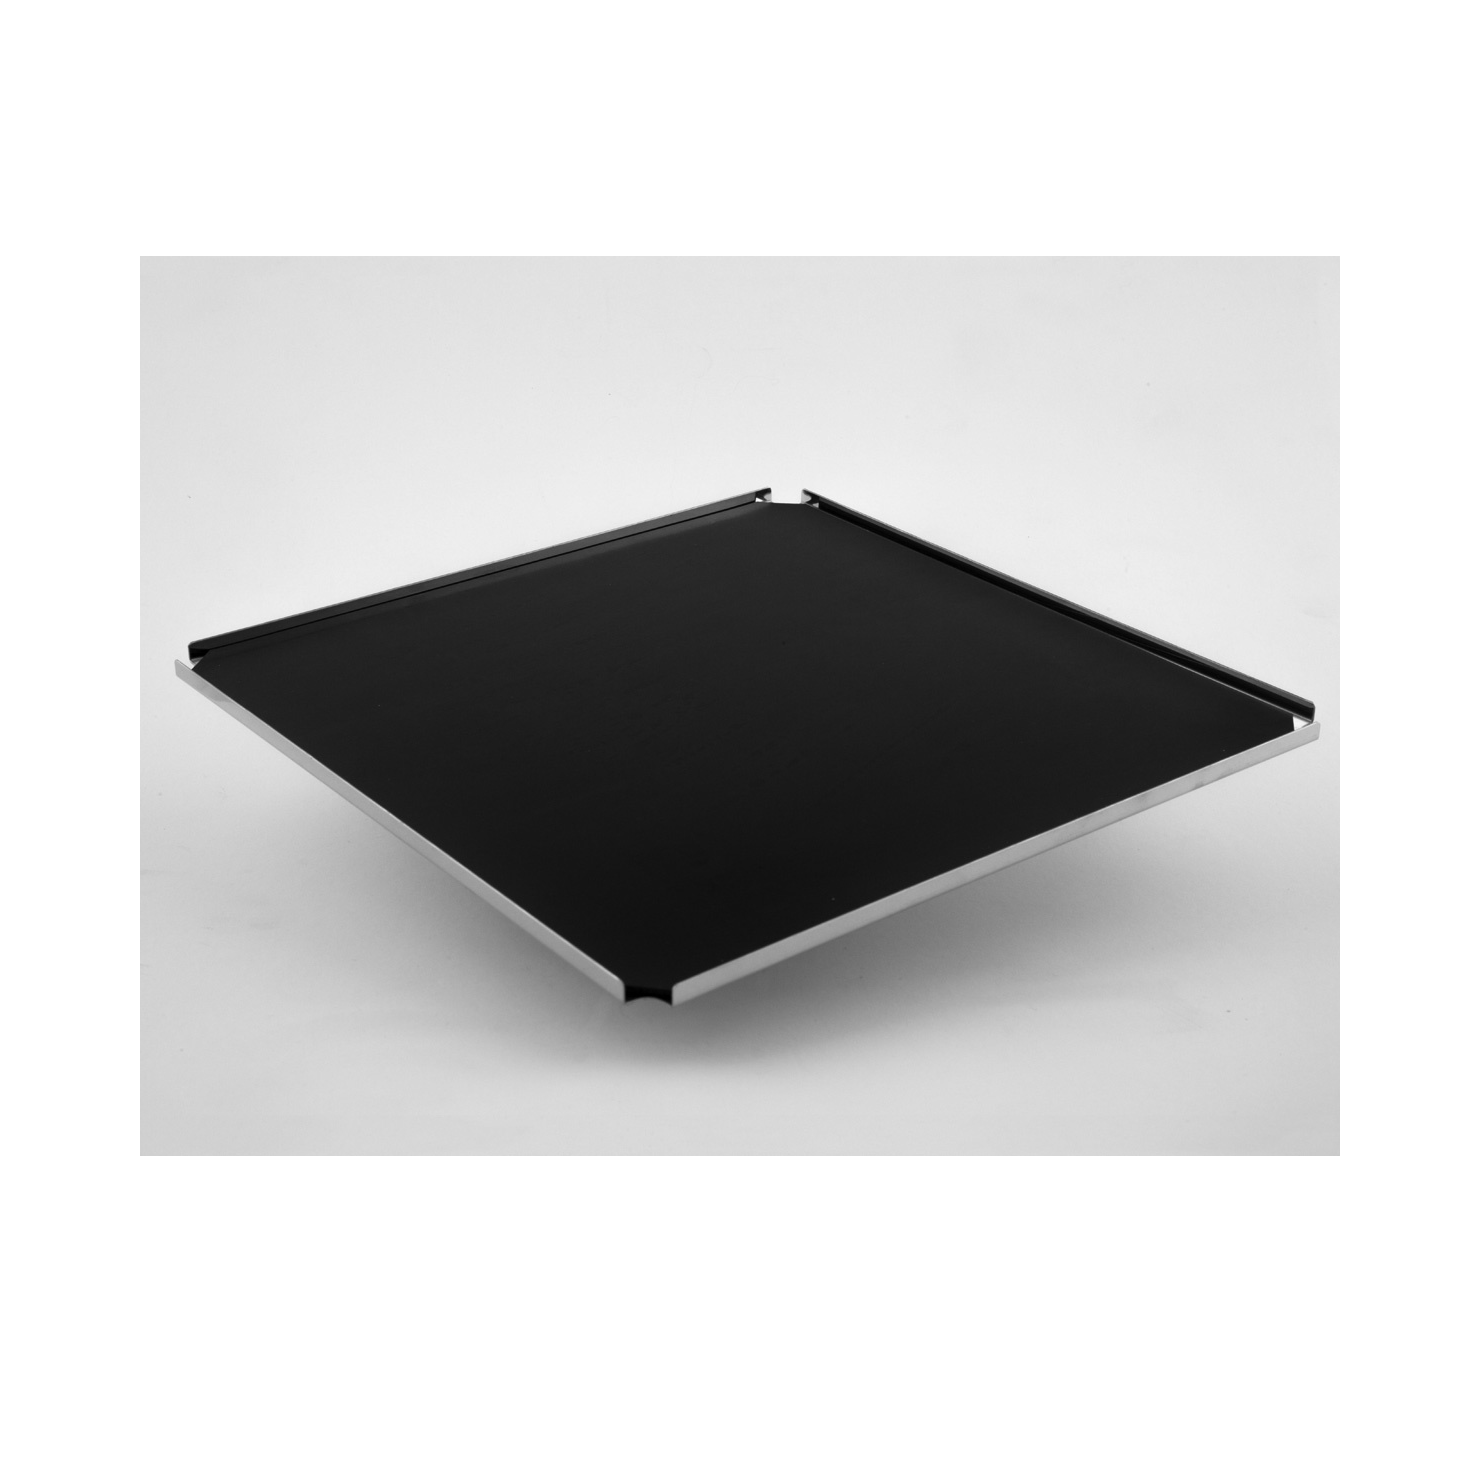 Browse Corning™ Flat Platform with Nonslip Rubber Mat, 300 x 300 mm